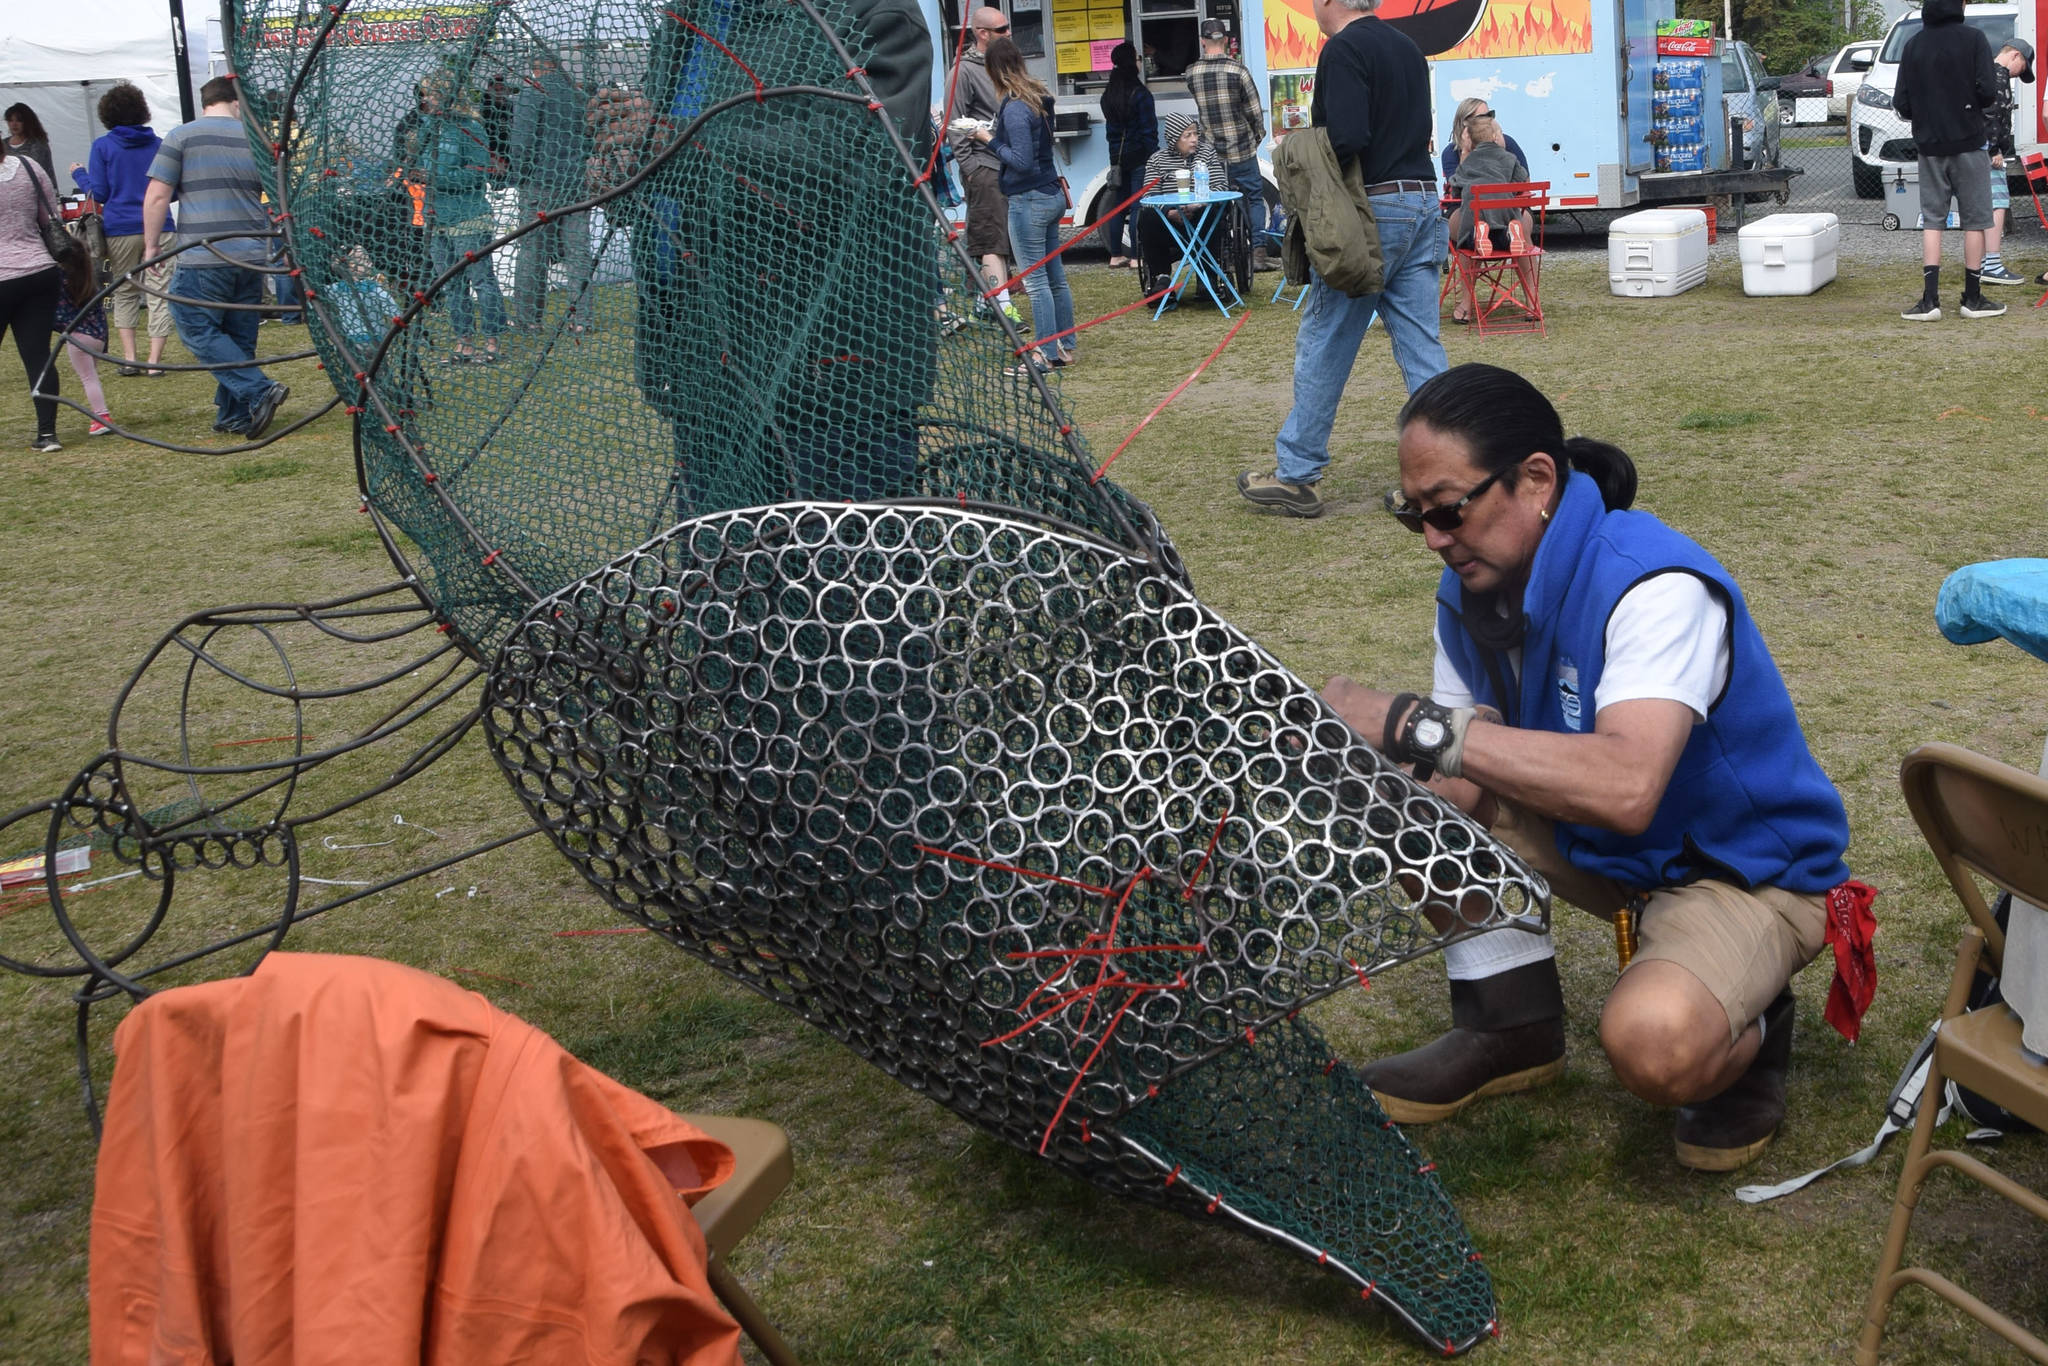 photos by Brian Mazurek / Peninsula Clarion                                 Cam Choy, Associate Professor of Art at Kenai Peninsula College, works on a salmon sculpture in collaboration with the Kenai Watershed Forum during the Kenai River Festival at Soldotna Creek Park in Soldotna on June 8, 2019.